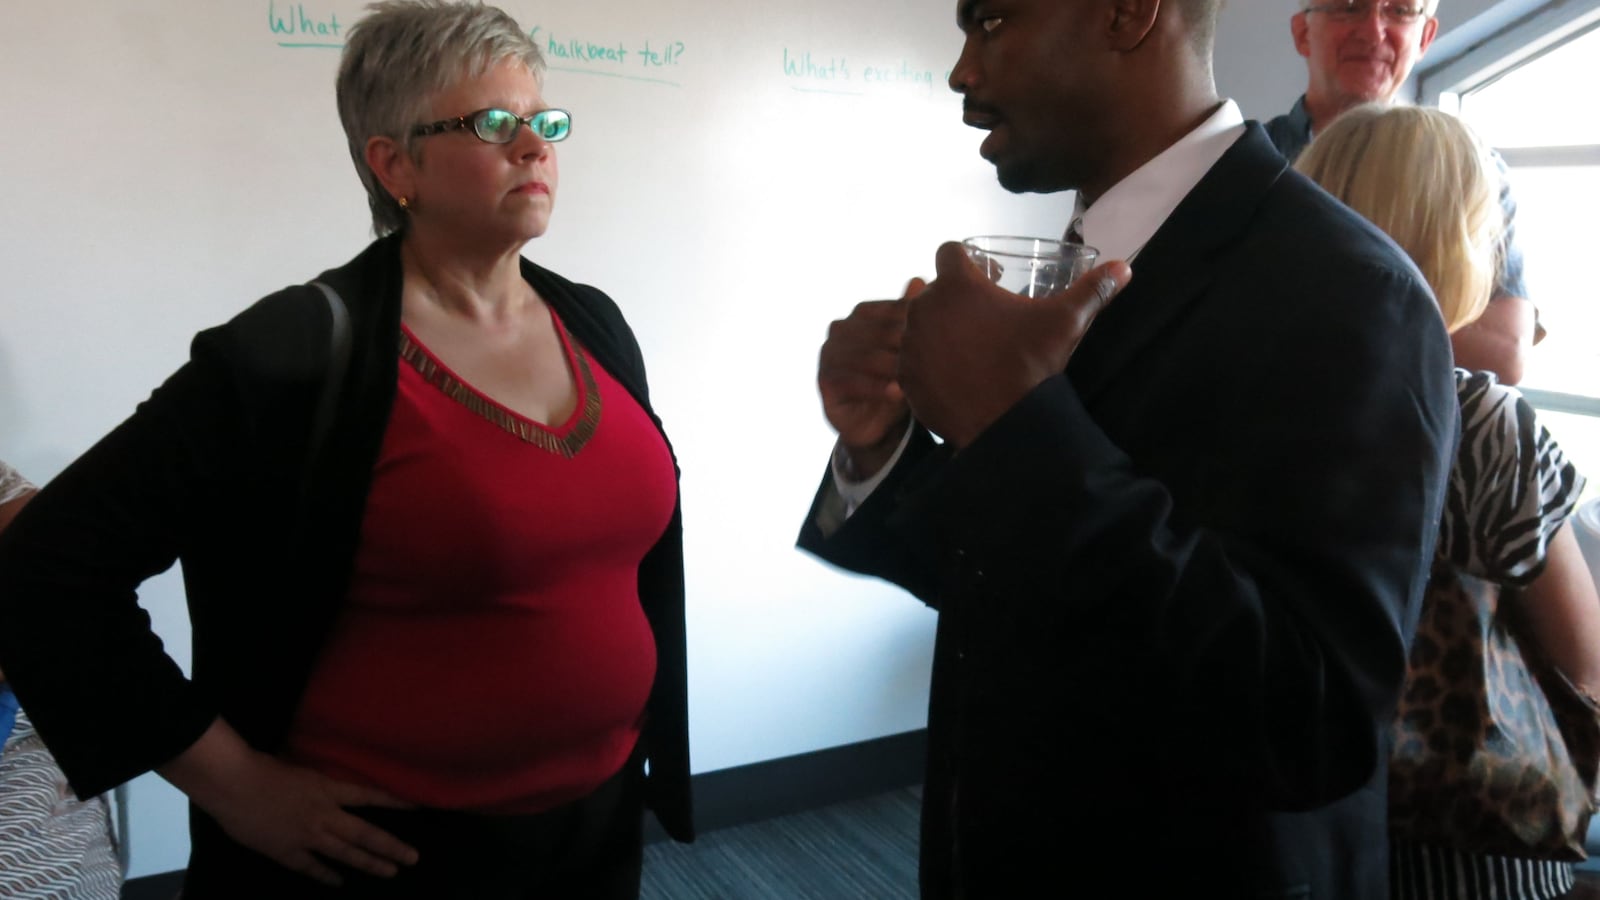 Chalkbeat TN Bureau Chief Daarel Burnette II talks education issues with Teresa Wasson, who is with SCORE, which stands for State Collaborative on Reforming Education.